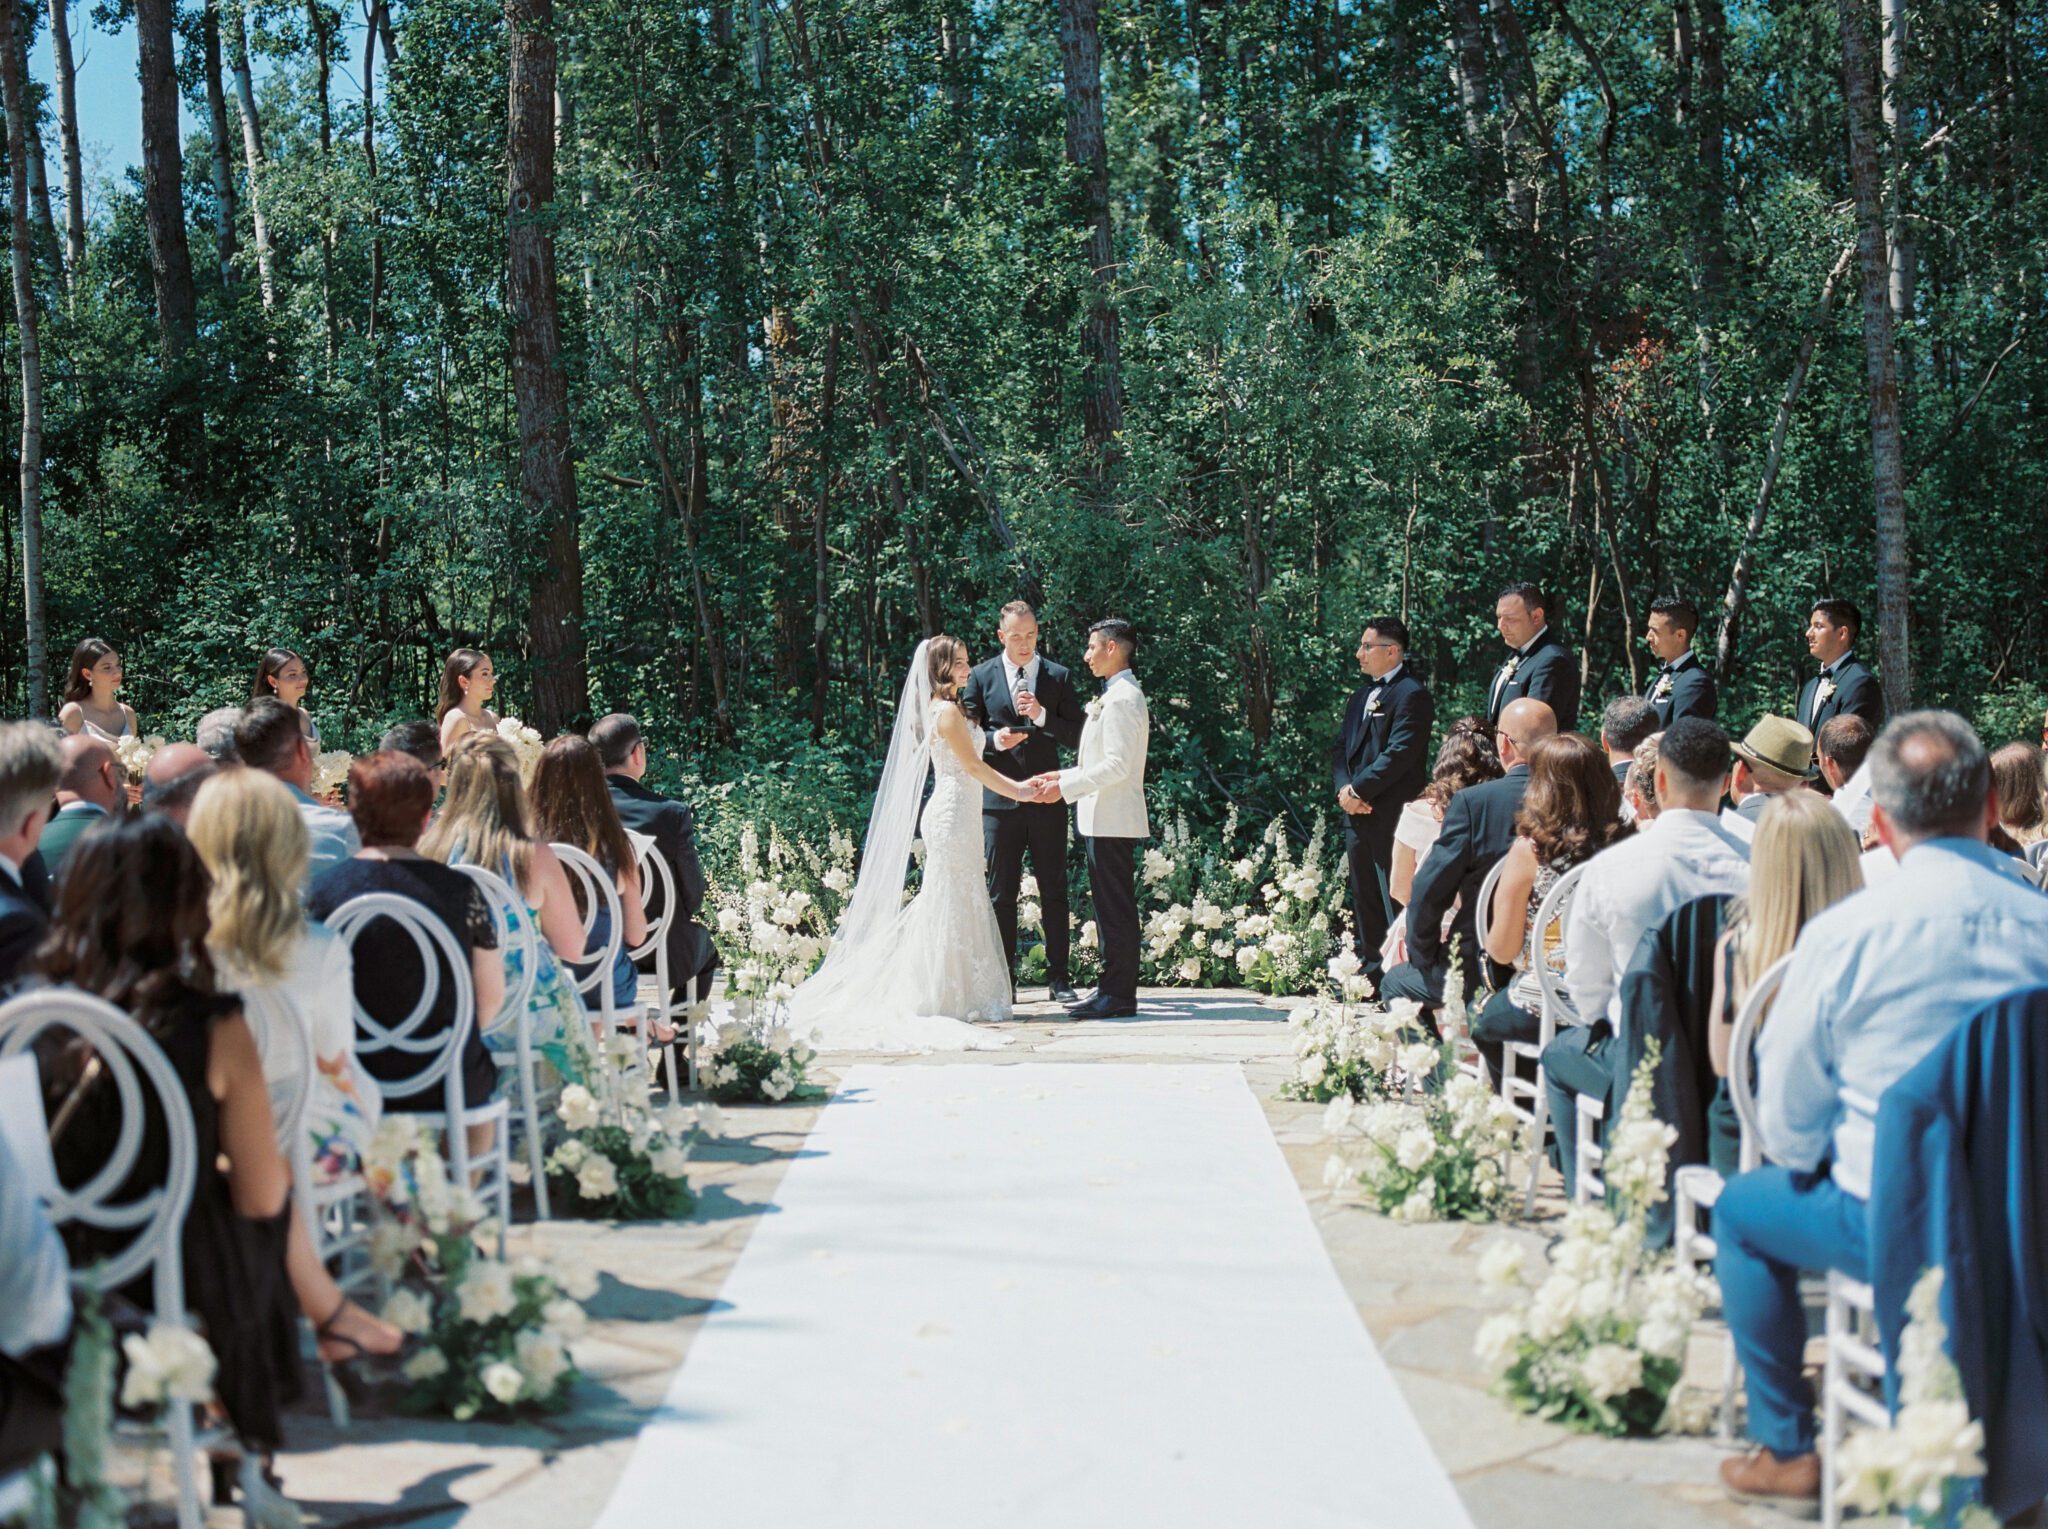 Elegant wedding ceremony at Sparrow Lane Events in Alberta. Classic colour palette of white, blush, and green wedding inspiration. 